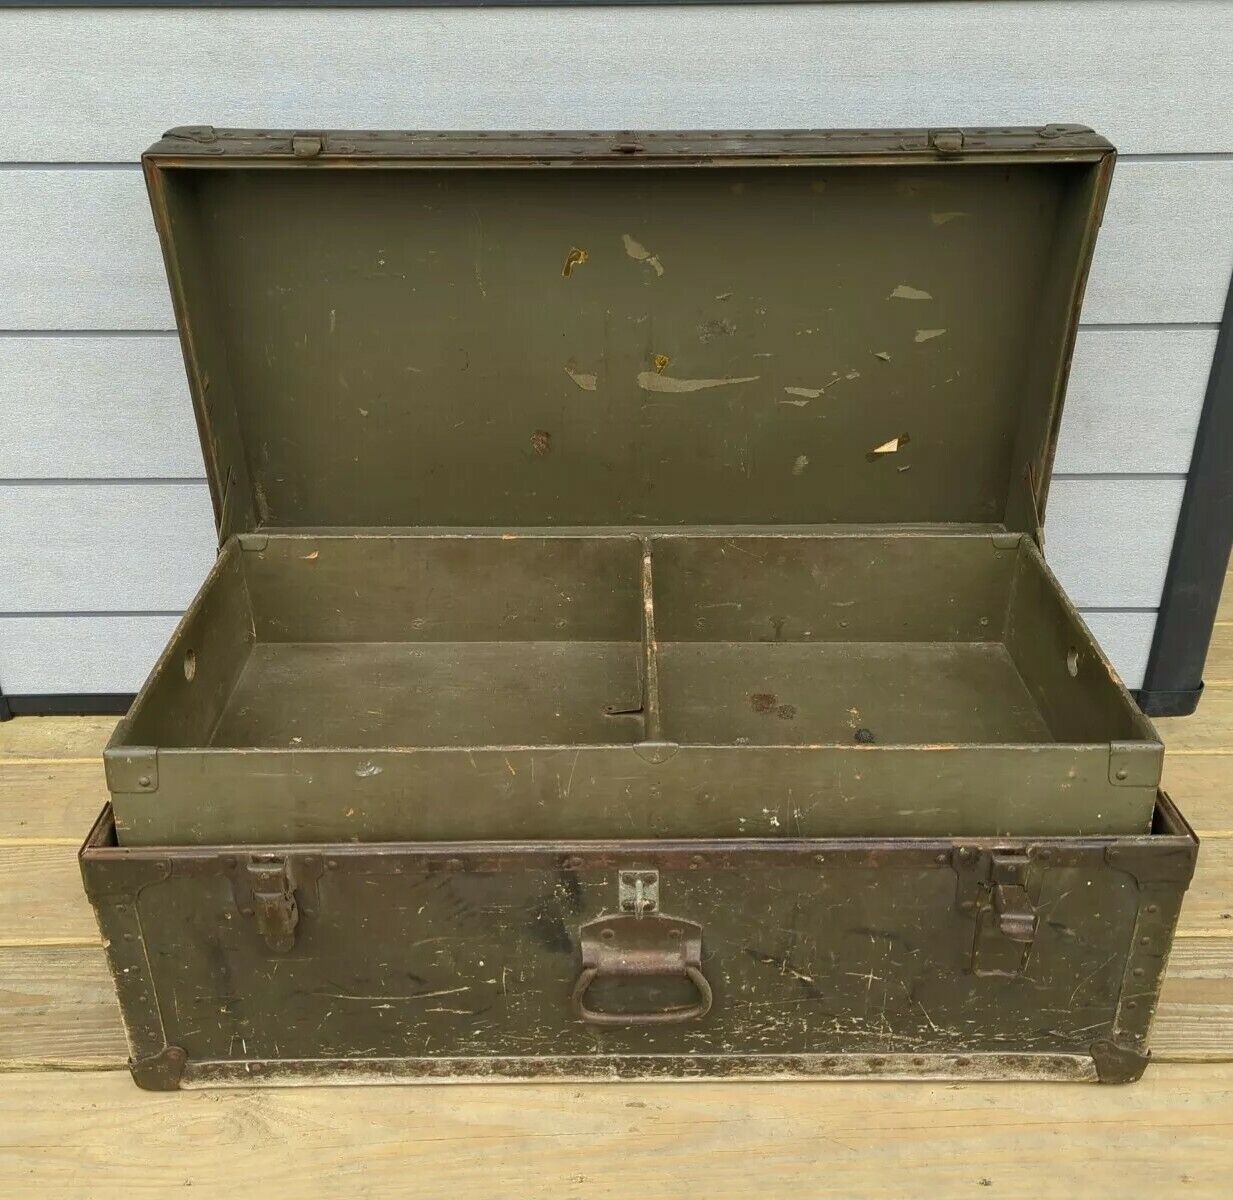 1947 Vintage Foot Locker Trunk WWII Era Authentic WITH TRAY FOR DISPLAY RESTORE